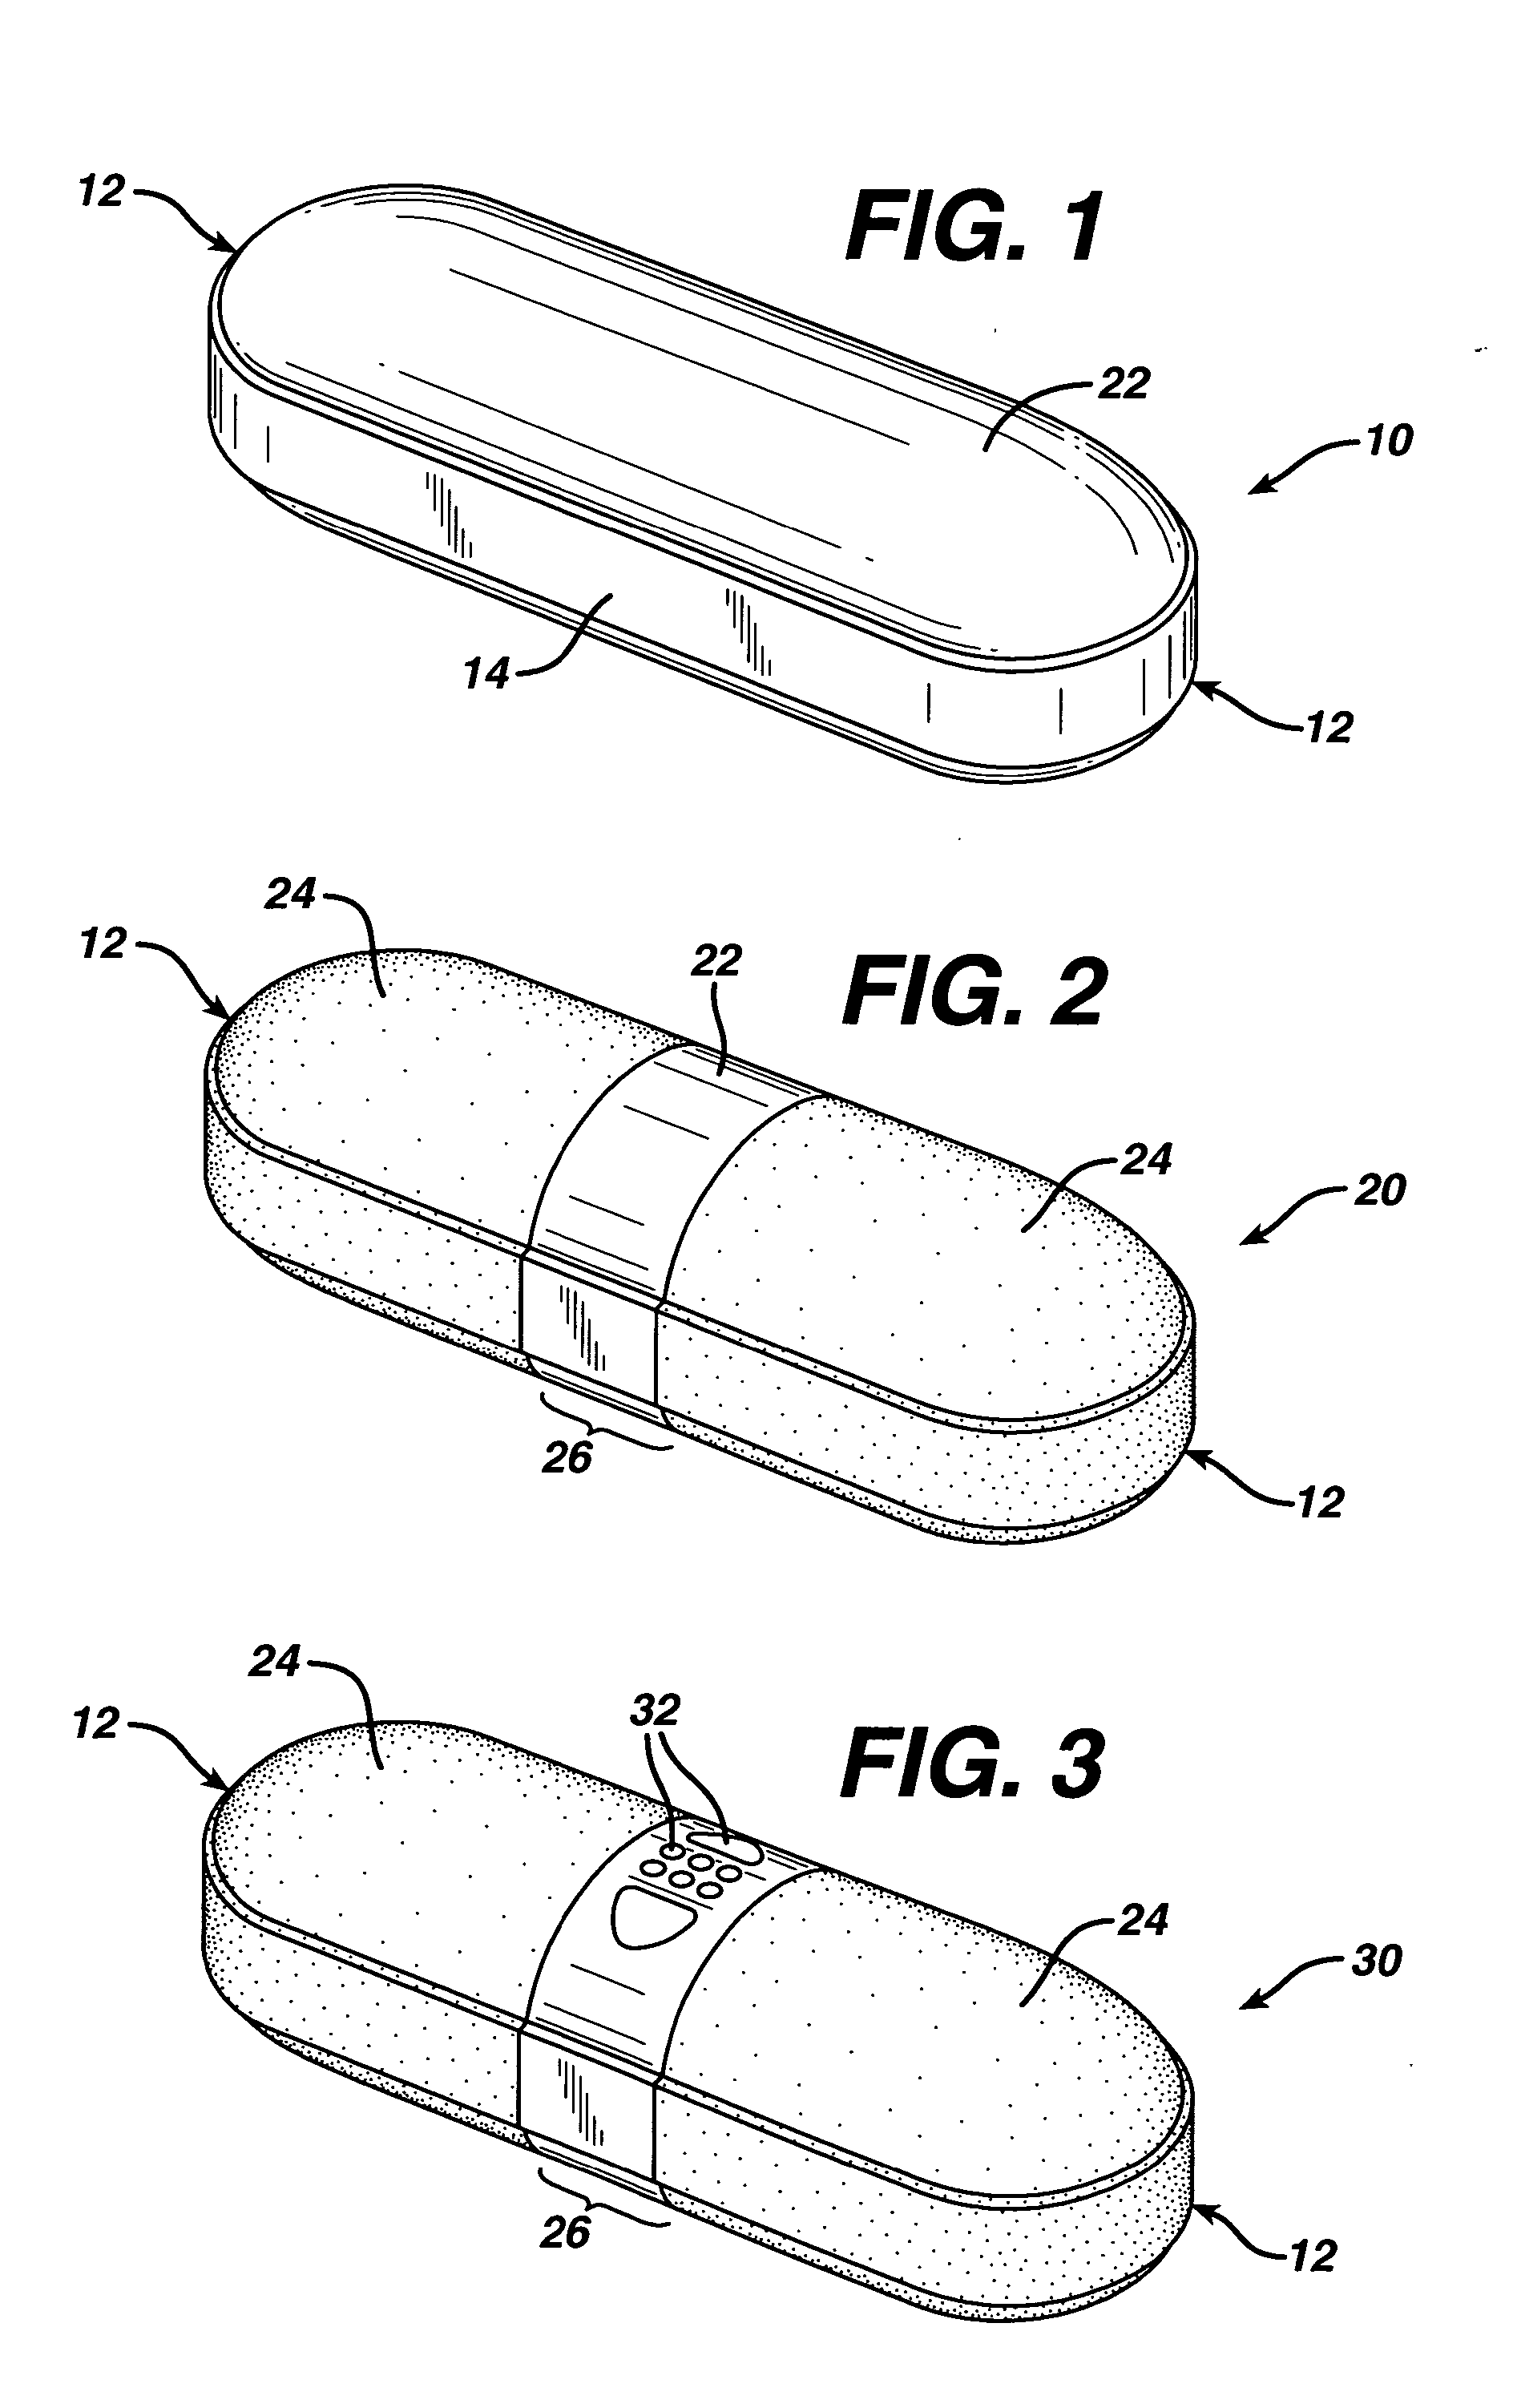 Rapidly disintegrating gelatinous coated tablets